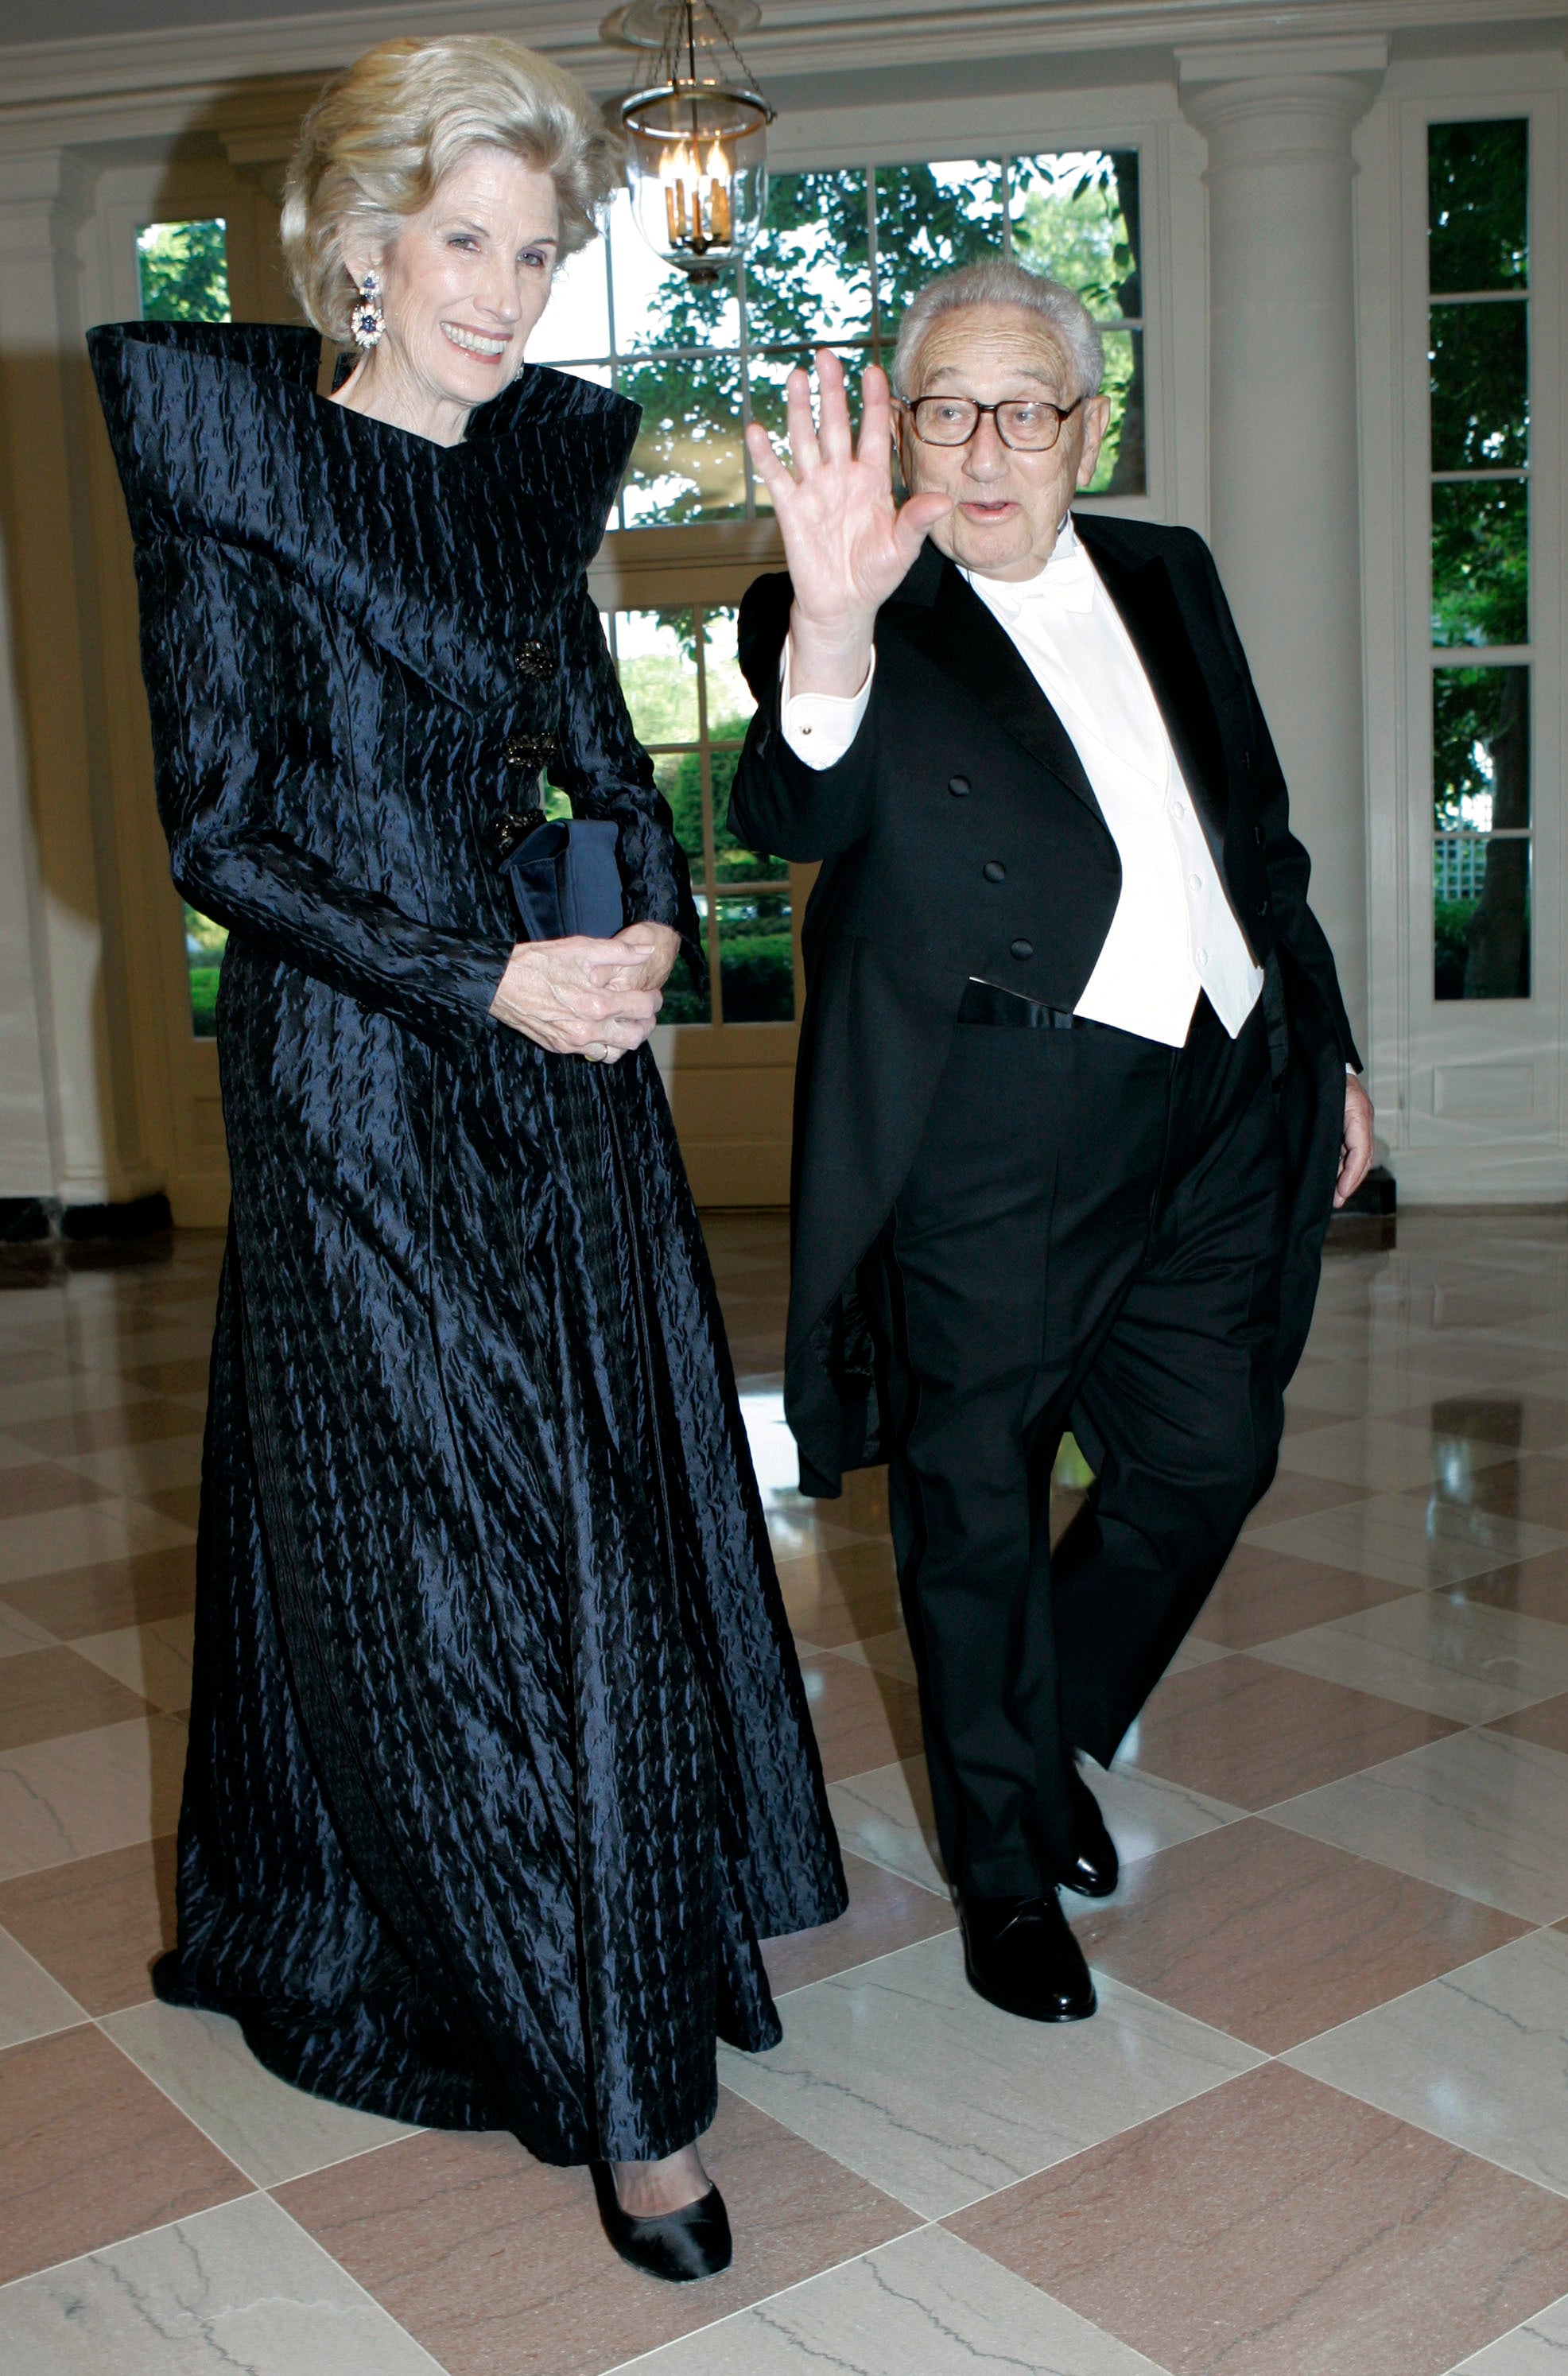 Henry Kissinger, right, and his wife Nancy walk through the Booksellers Area as they arrive for the State Dinner in honor of Queen Elizabeth II and her husband Prince Philip, May 7, 2007, at the White House in Washington.